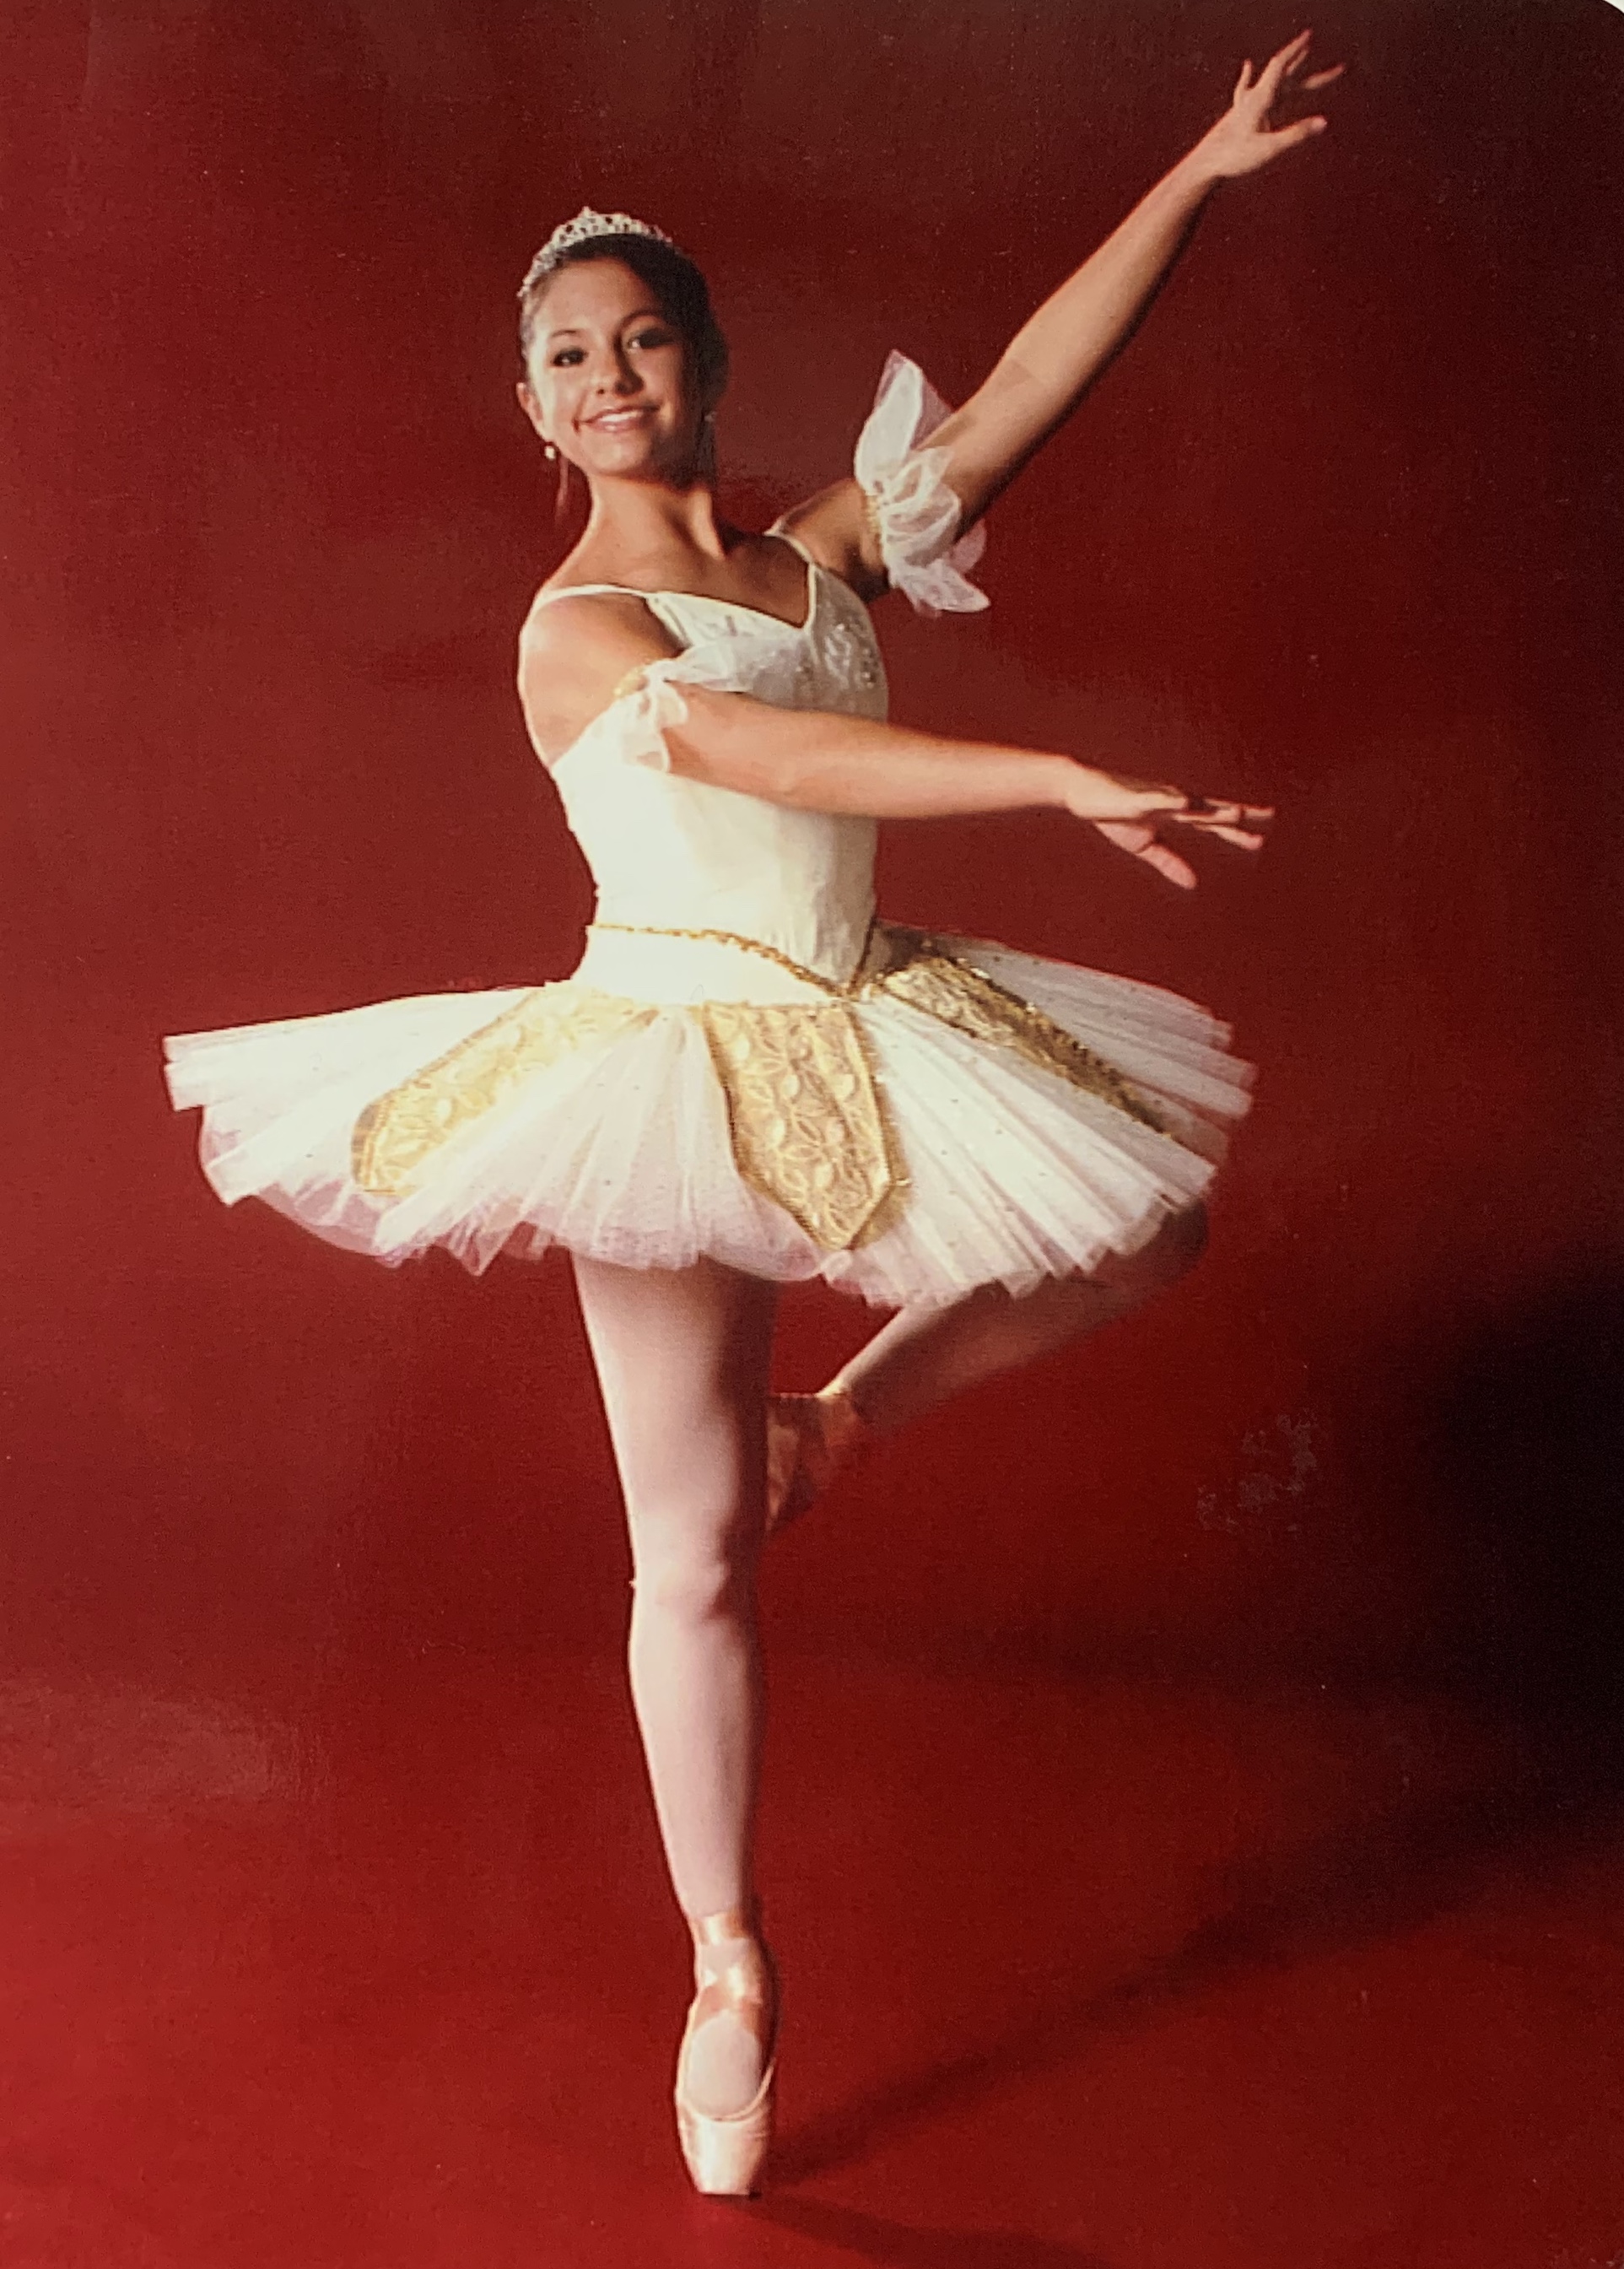 Photo of Liz Moy in a ballet position wearing a tutu against a red background